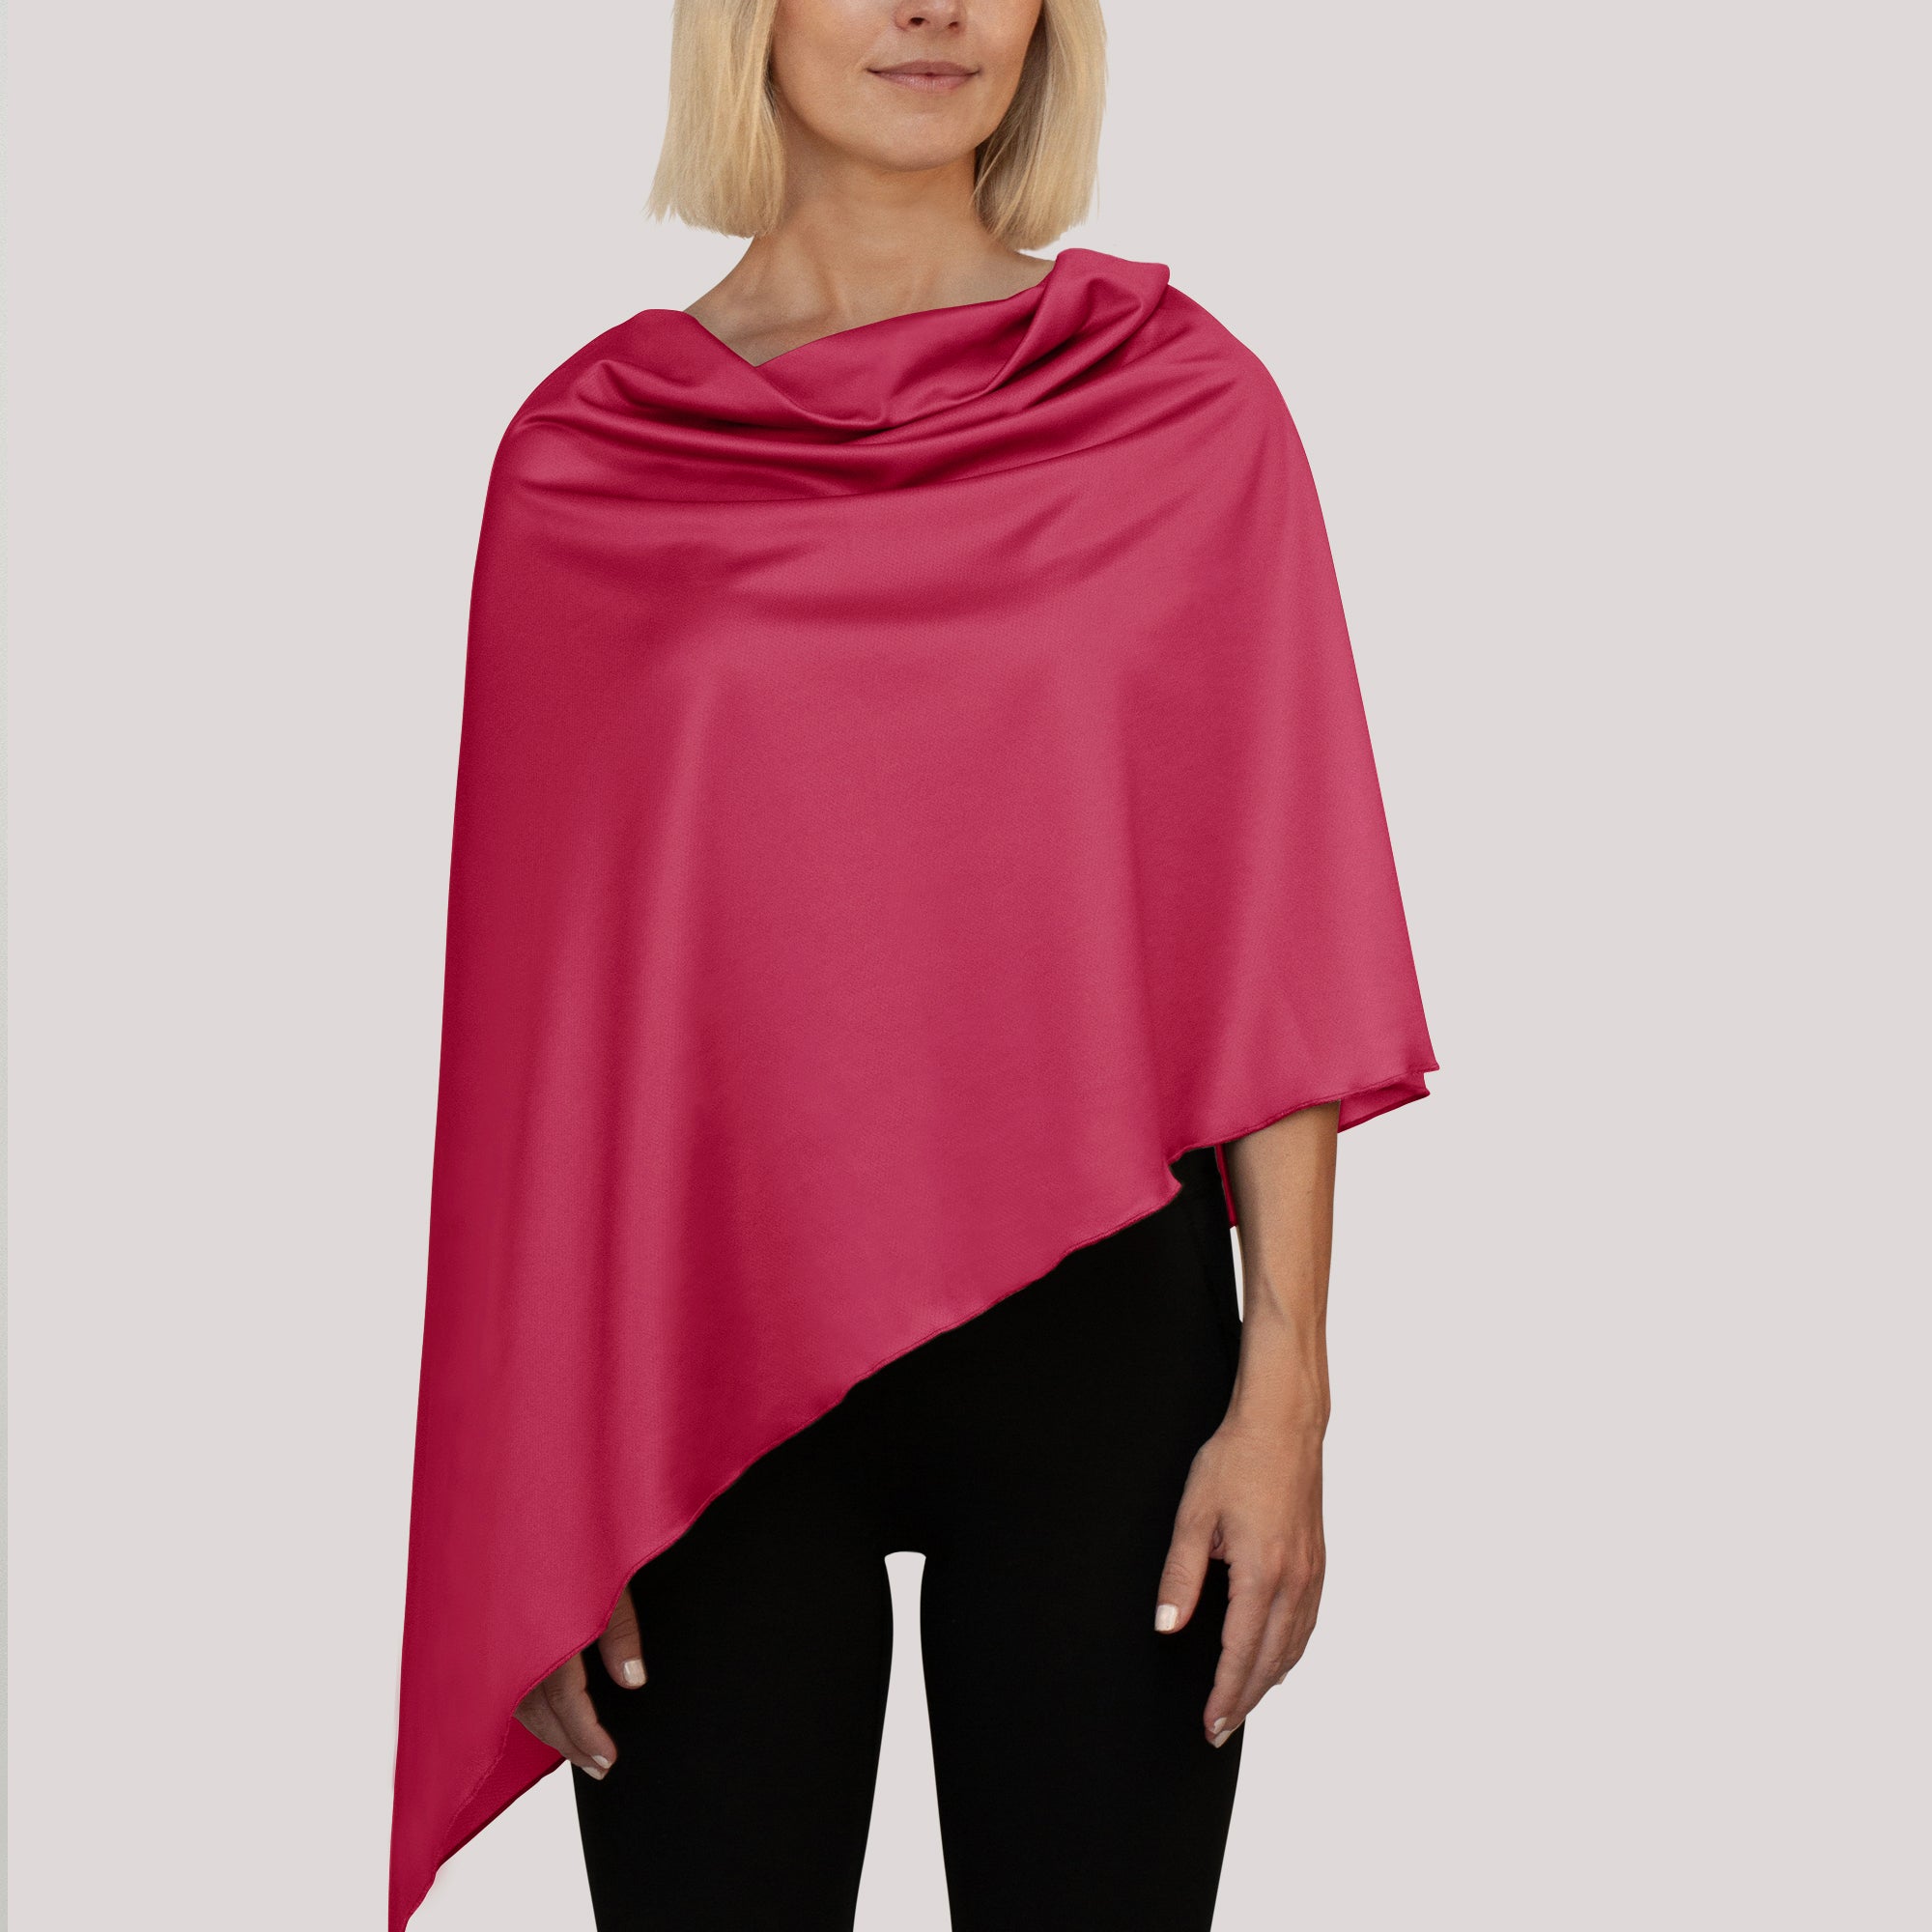 Ladies Poncho Watermelon UPF50+ sun safe clothing, sun protective clothing for women, sun shirts, sun protection shirts, sun safe clothing, sun protection products Australia